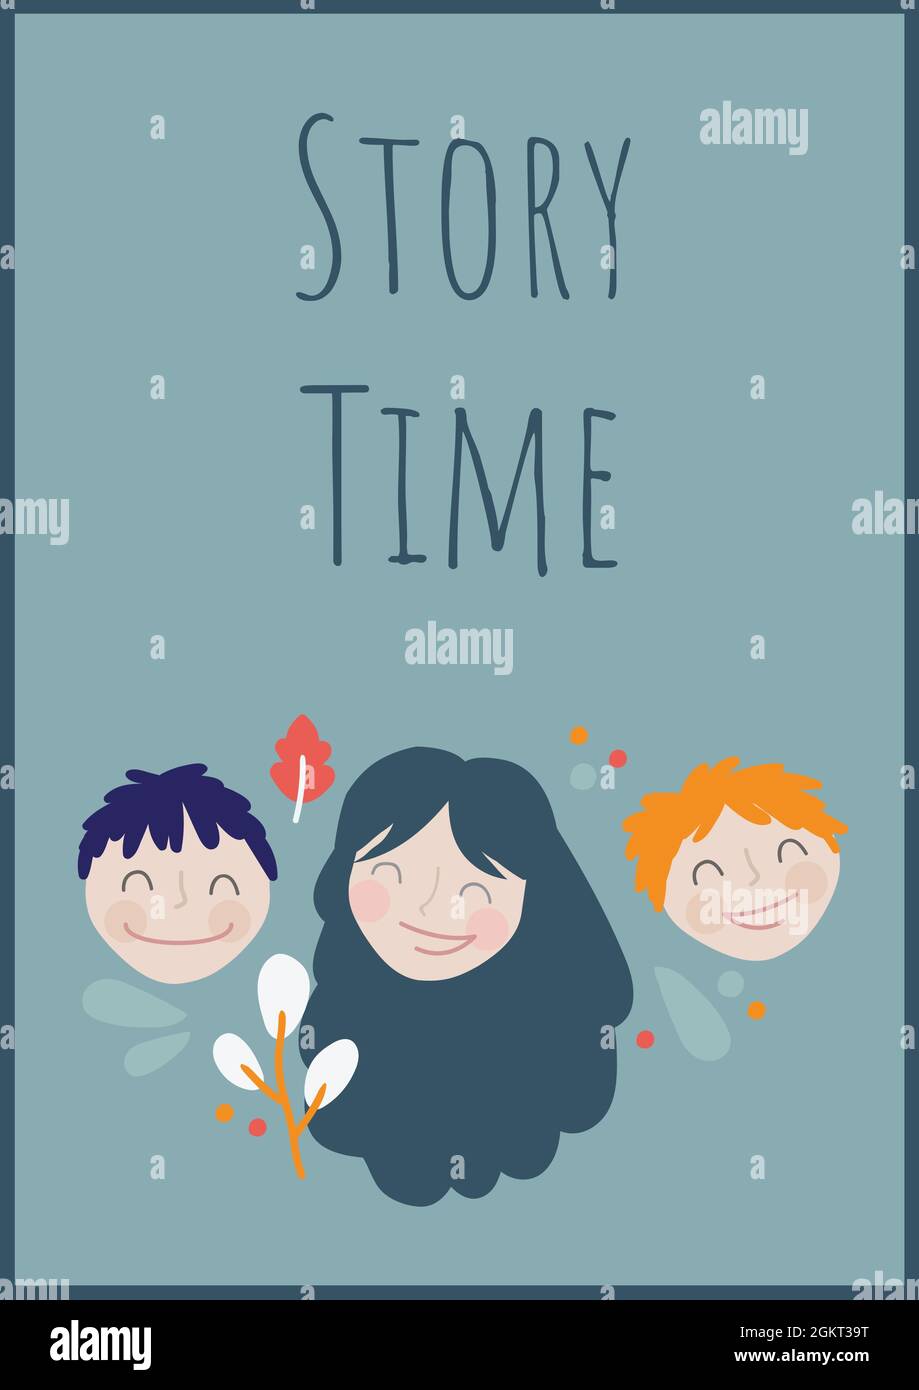 Story time text against woman and two kids icons on green background Stock Photo